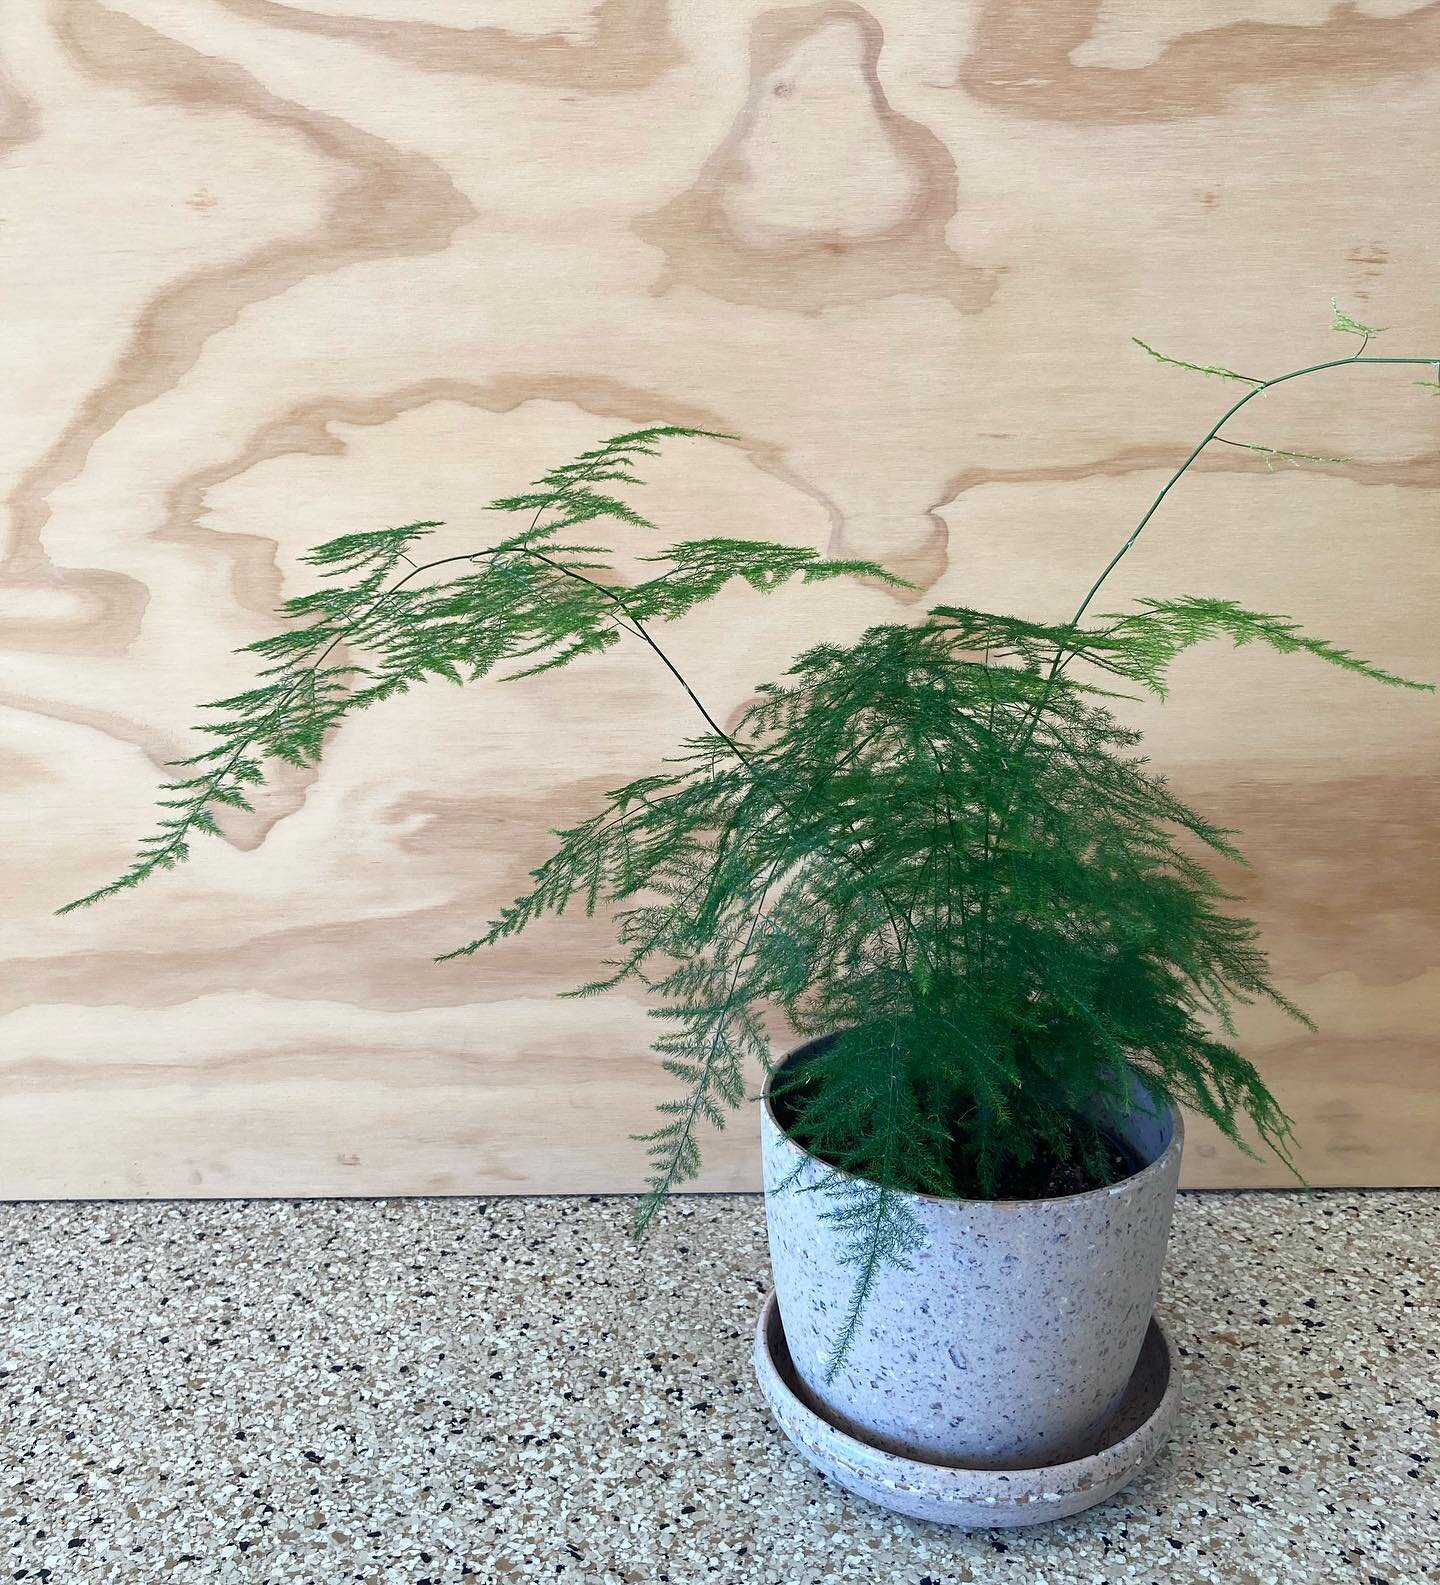 Our coffee bean husk pot looks phenomenal paired with an Asparagus Fern - some plant/pot combos just click! 

#fern #plantpot #planters #asparagusfern #plantdesign #interiordesign #pots #plantshop #plantstyling #plantstyle #plants #ferns